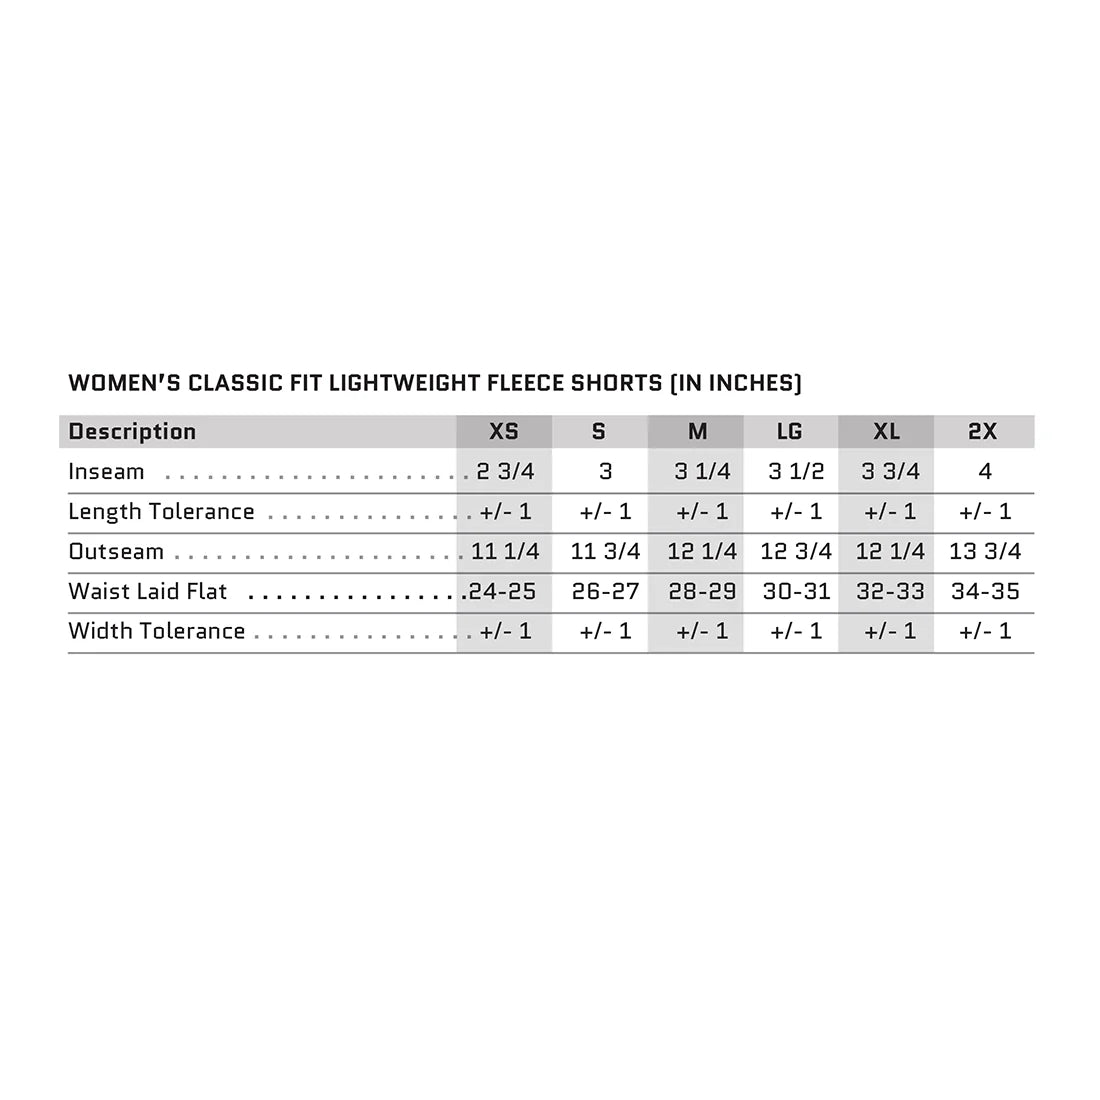 Sizing chart for Women's Classic Fit Lightweight Fleece Shorts. Measurements for the Inseam (+ length tolerance), Outseam, Waist Laid Flat (+ width tolerance) is included. (Per manufacturer specs)